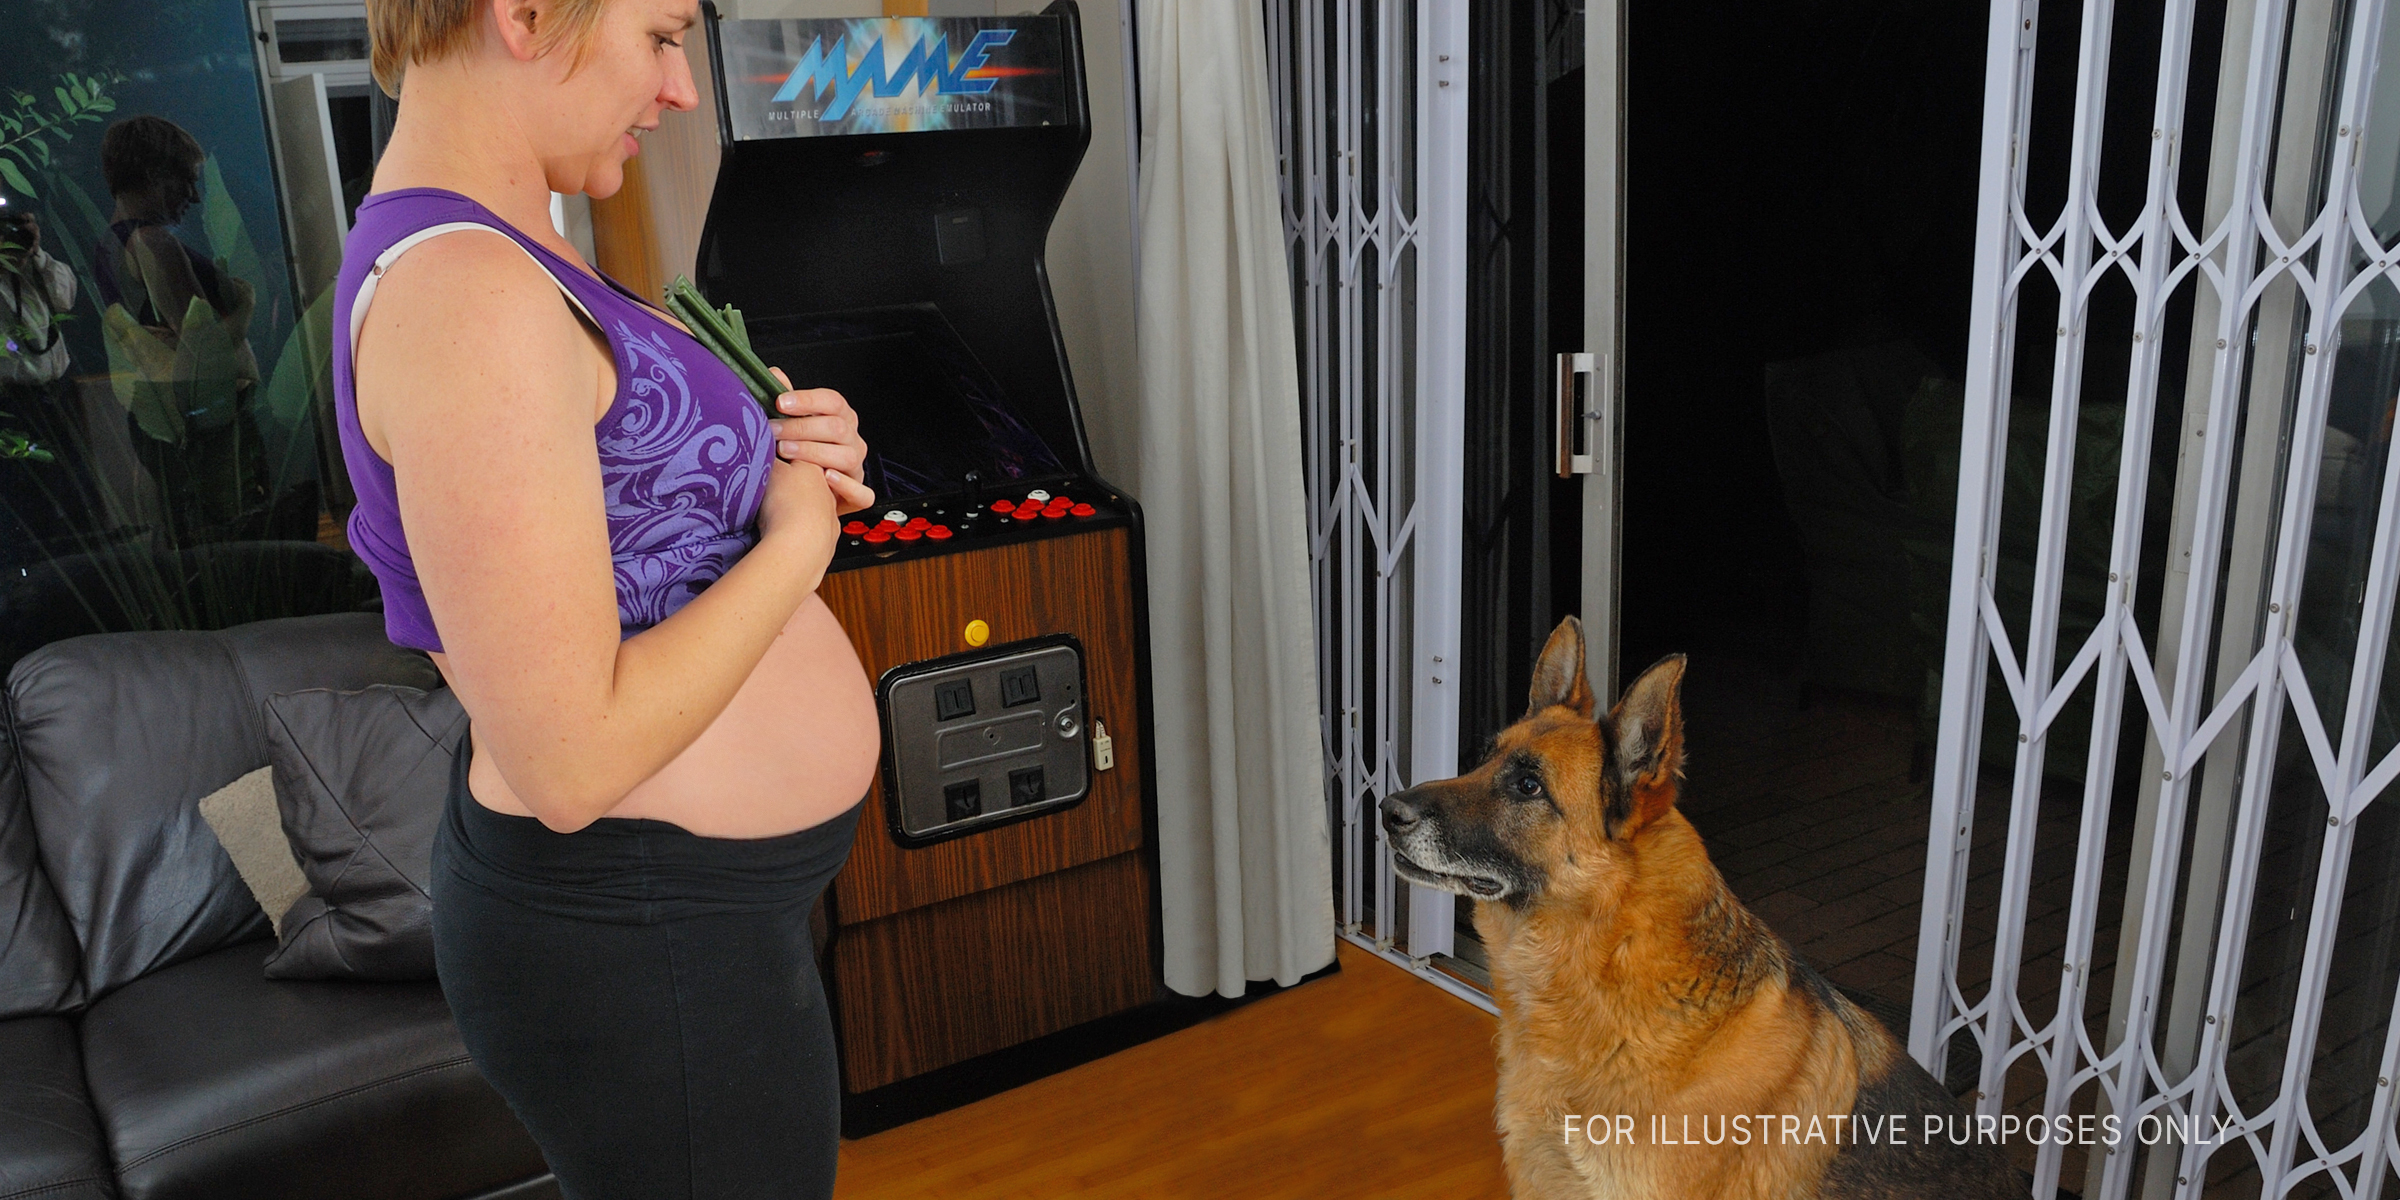 A German Shepherd dog looks up at a pregnant woman | Source: Flickr / Locutis (CC BY-SA 2.0)